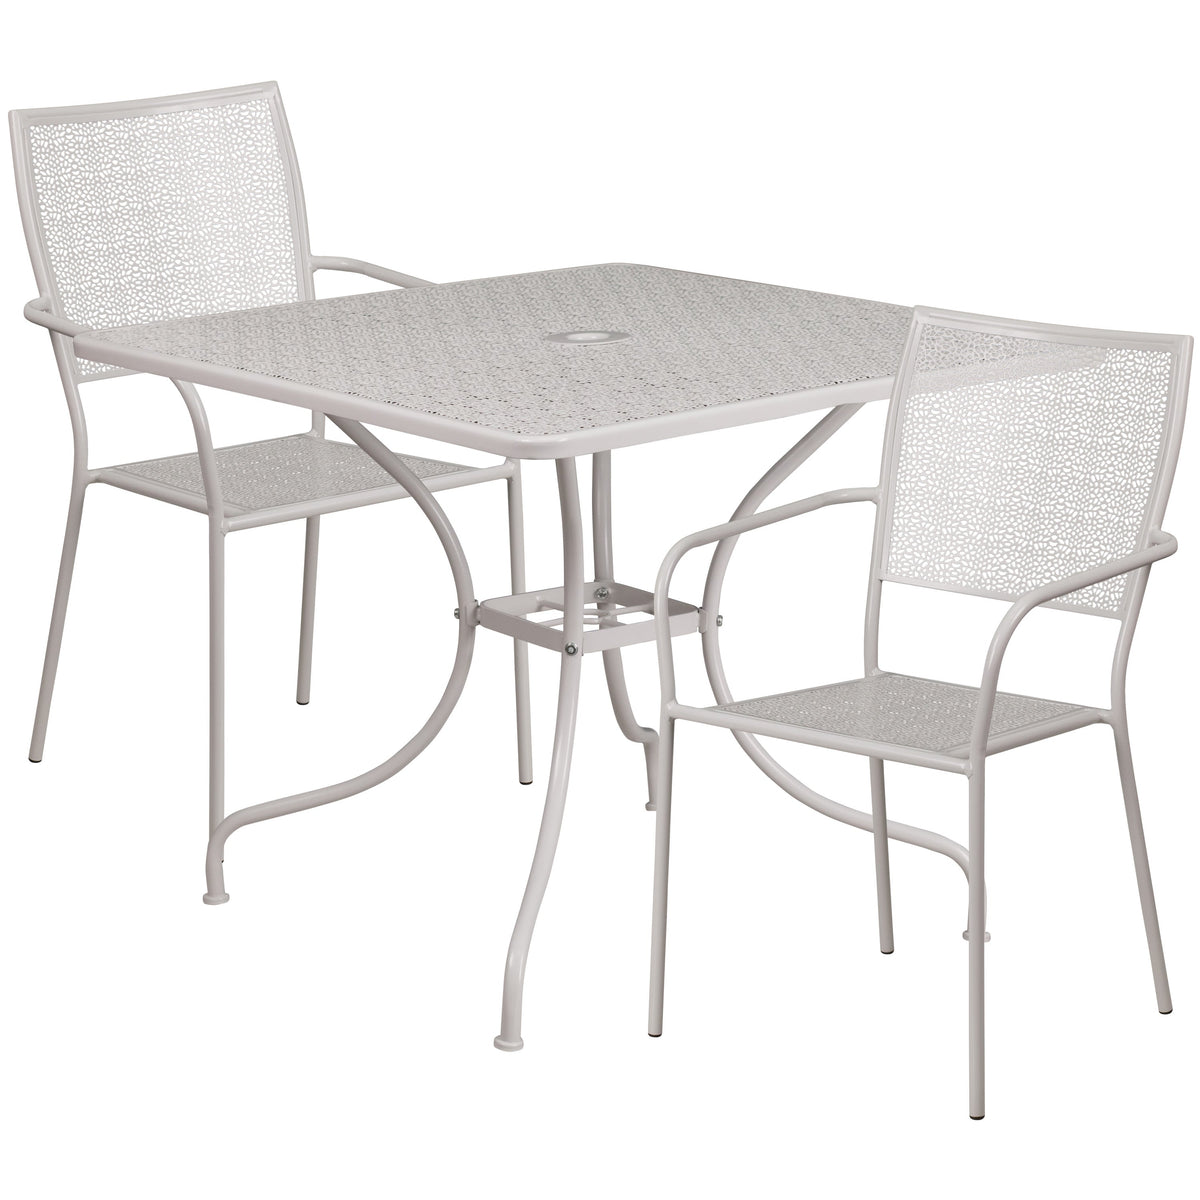 Light Gray |#| 35.5inch Square Lt Gray Indoor-Outdoor Steel Patio Table Set w/2 Square Back Chairs